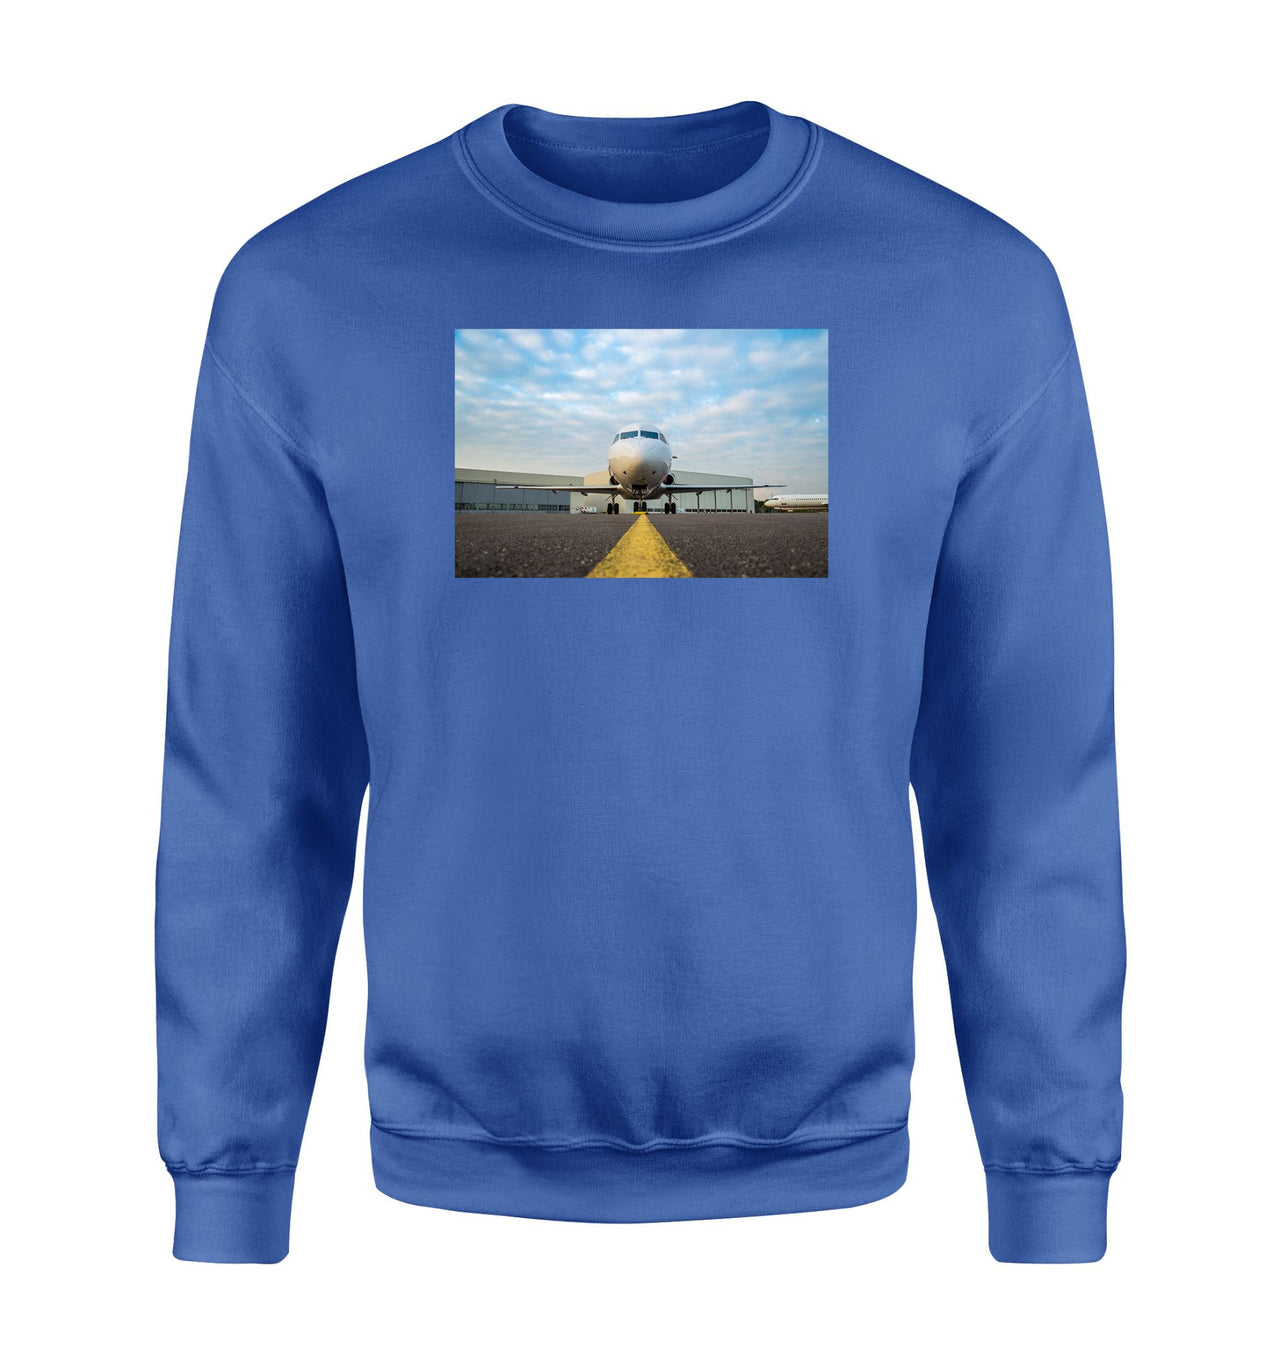 Face to Face with Beautiful Jet Designed Sweatshirts